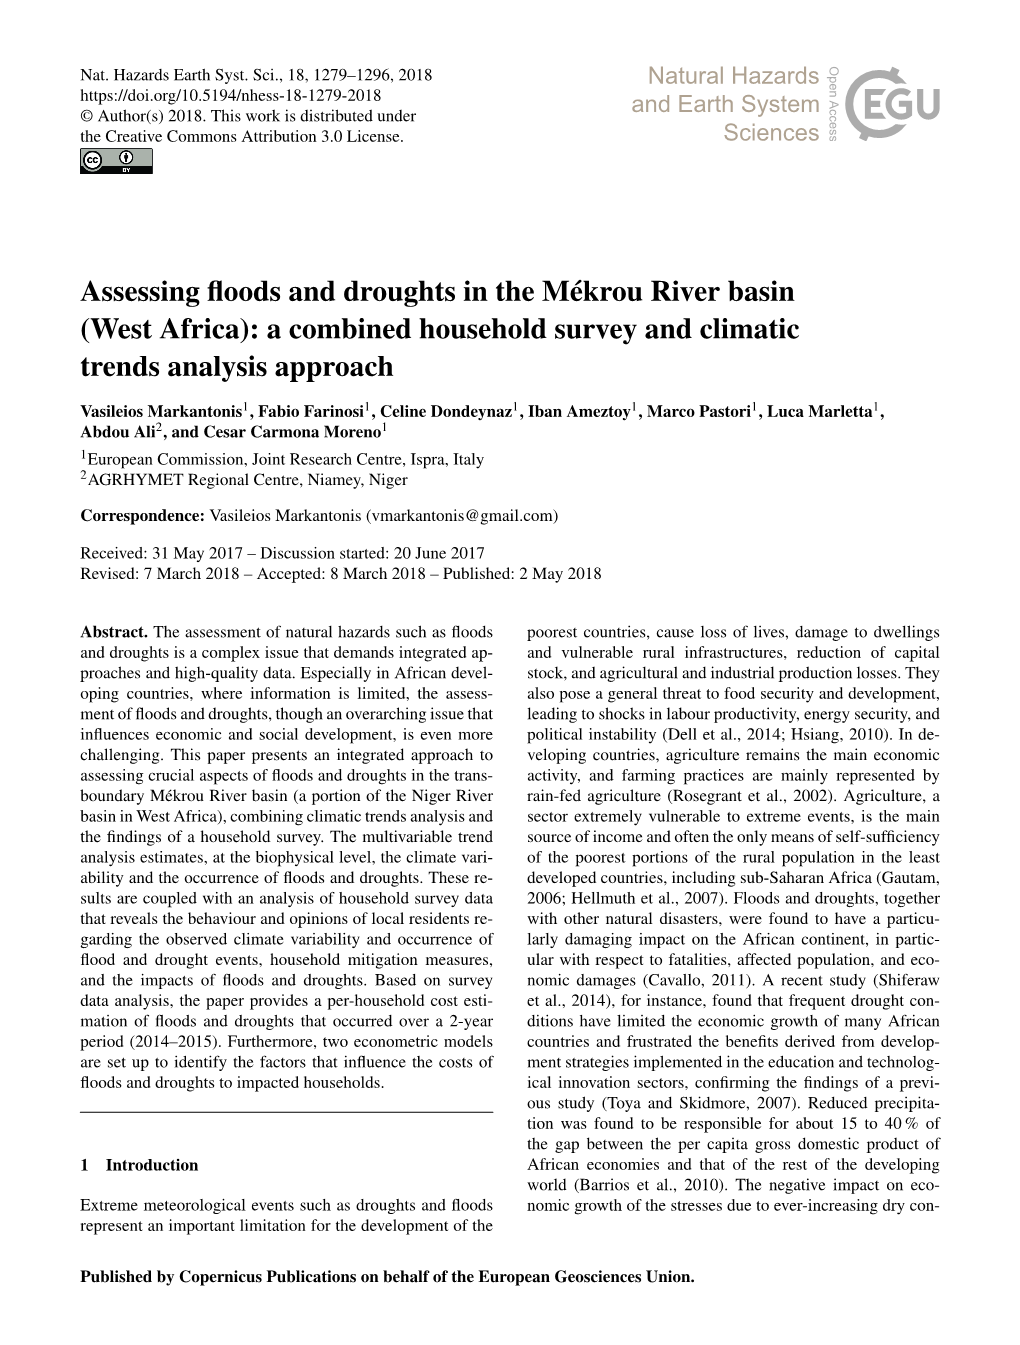 Article Is Available the Impacts of Extreme ﬂoods and Droughts Was Estimated